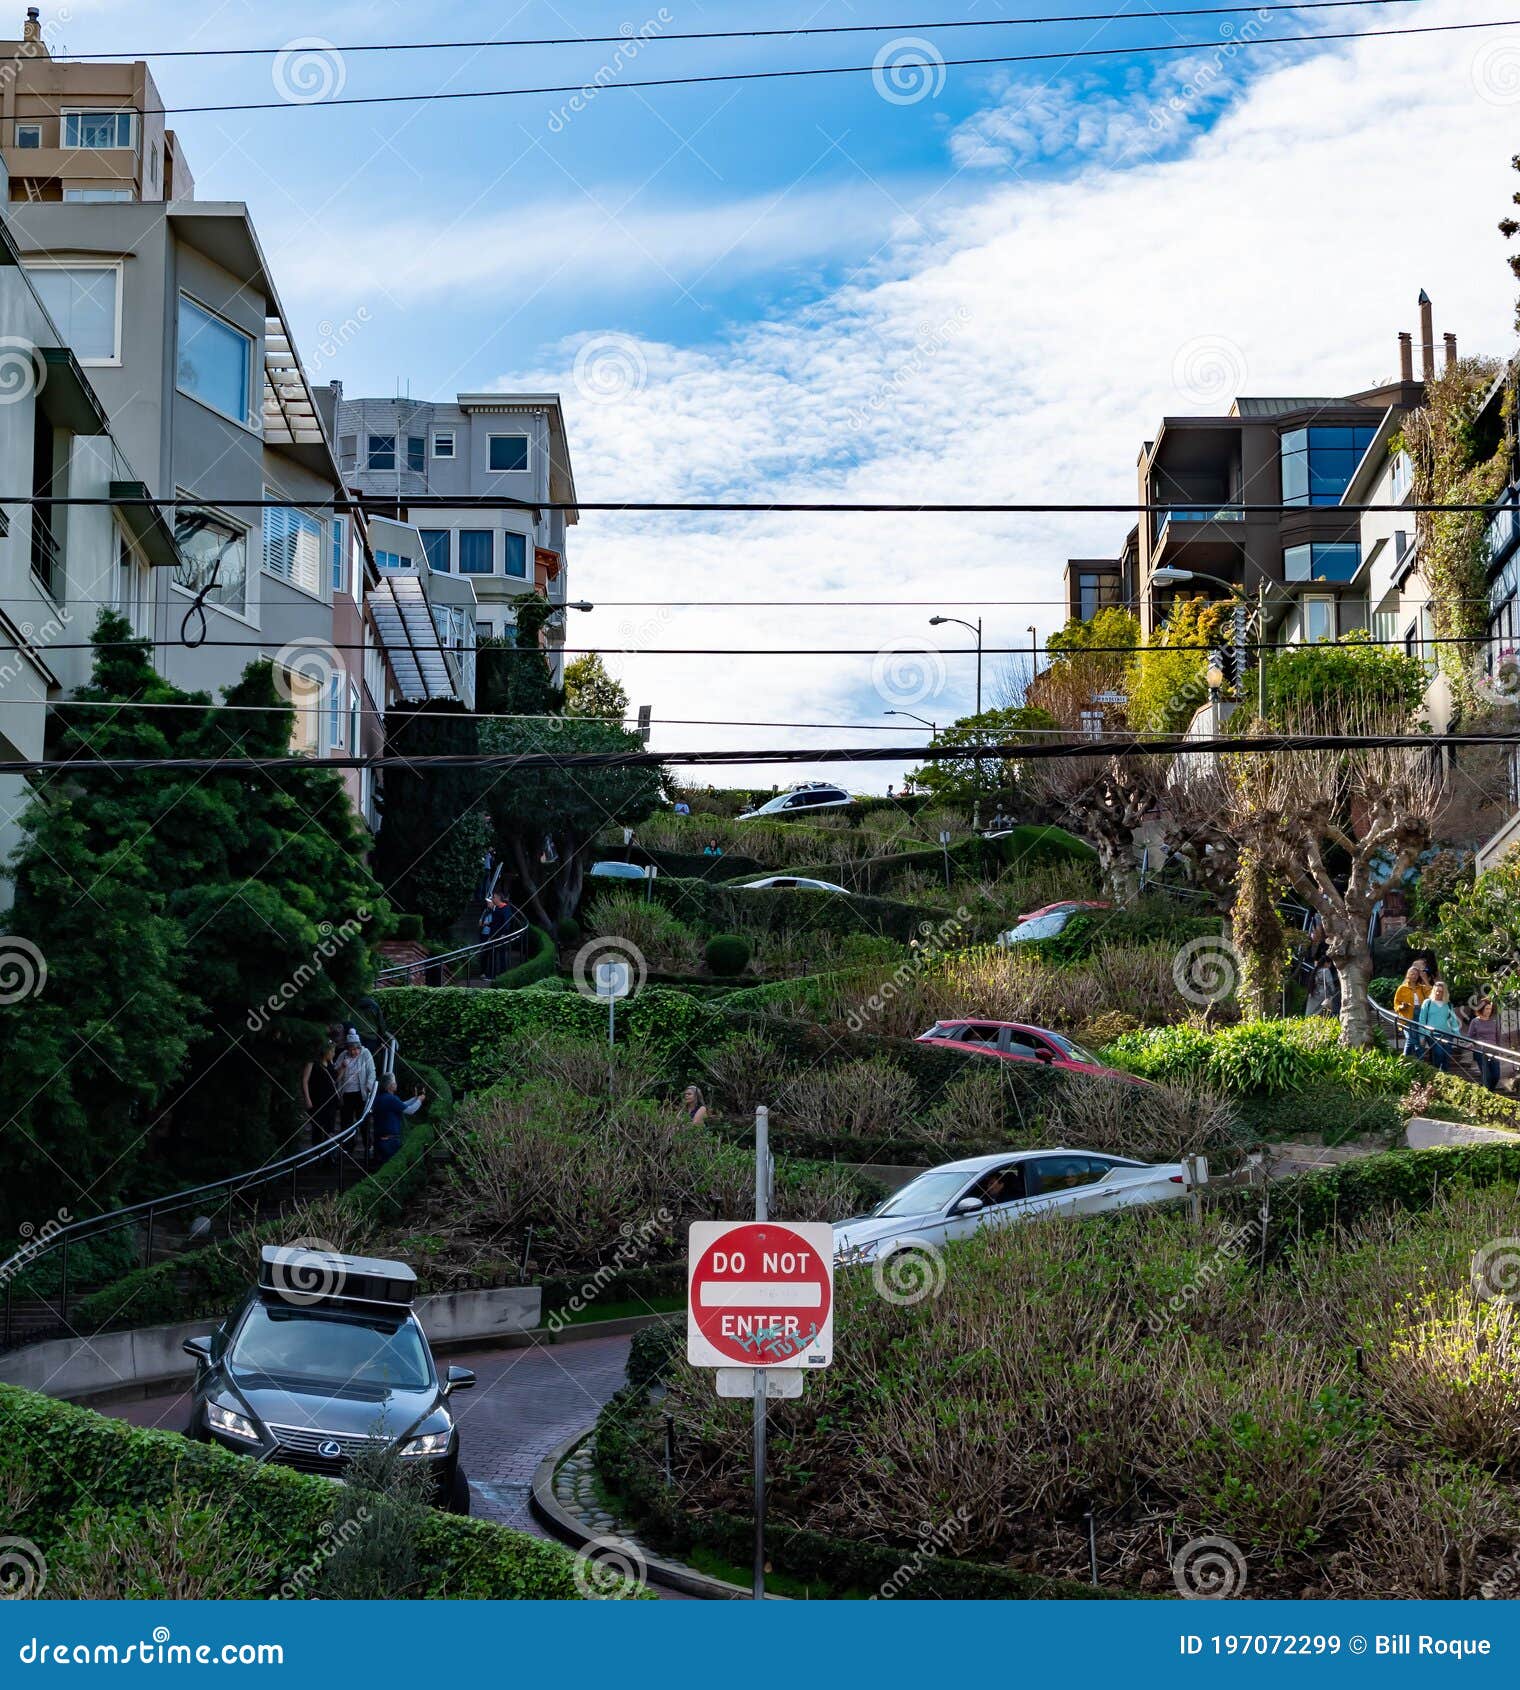 List 103+ Images lombard street steepest street in san francisco Completed